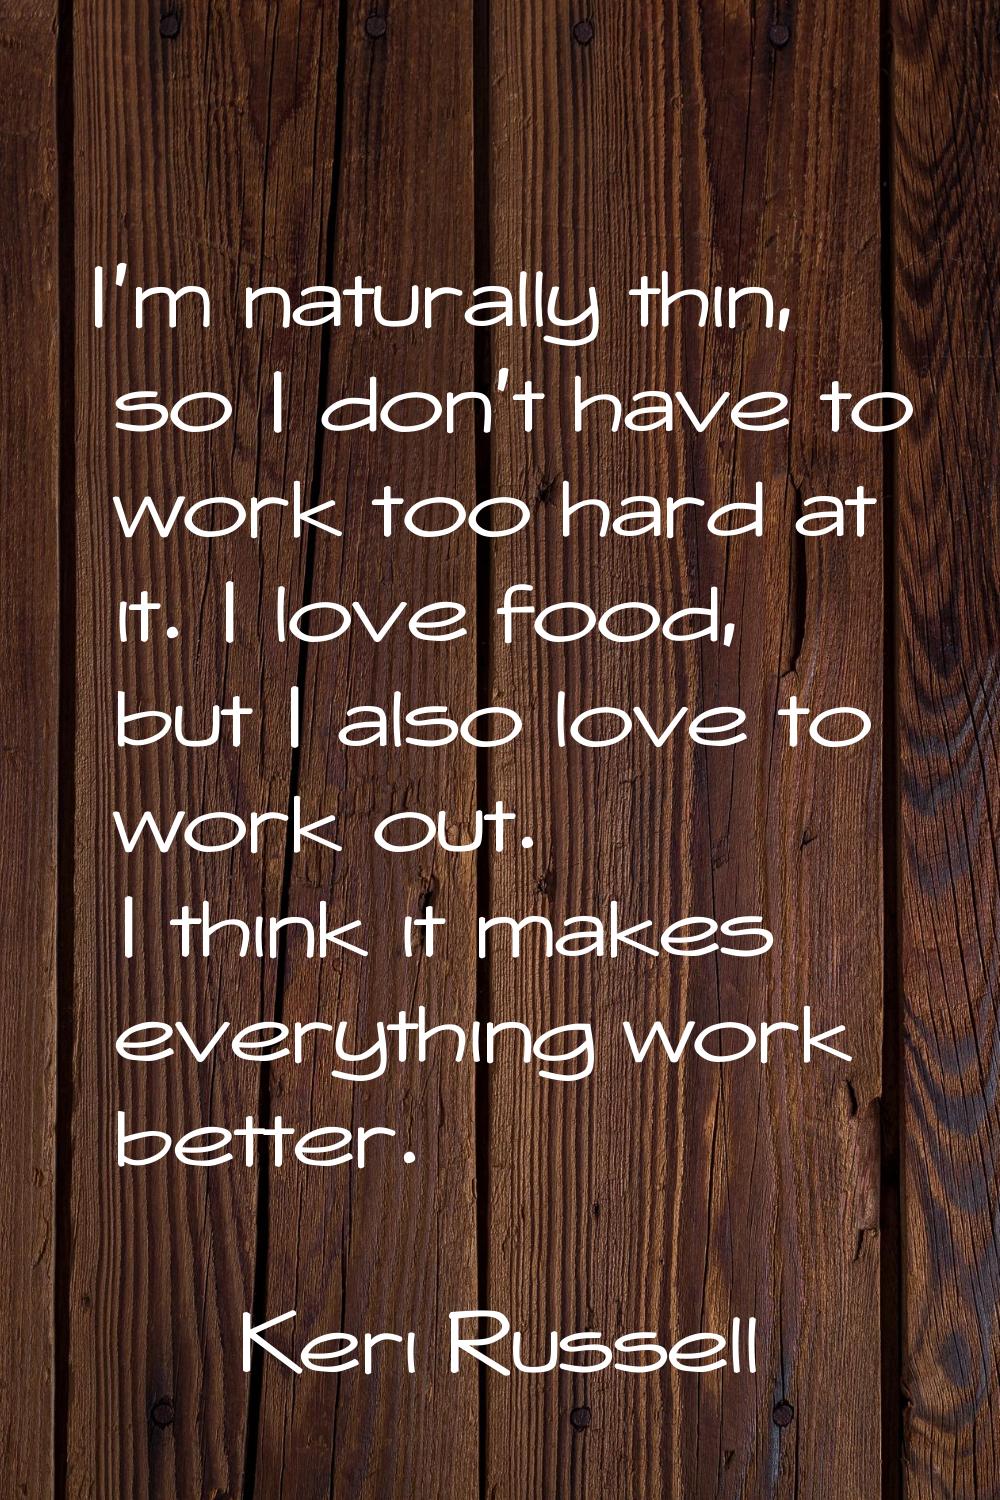 I'm naturally thin, so I don't have to work too hard at it. I love food, but I also love to work ou